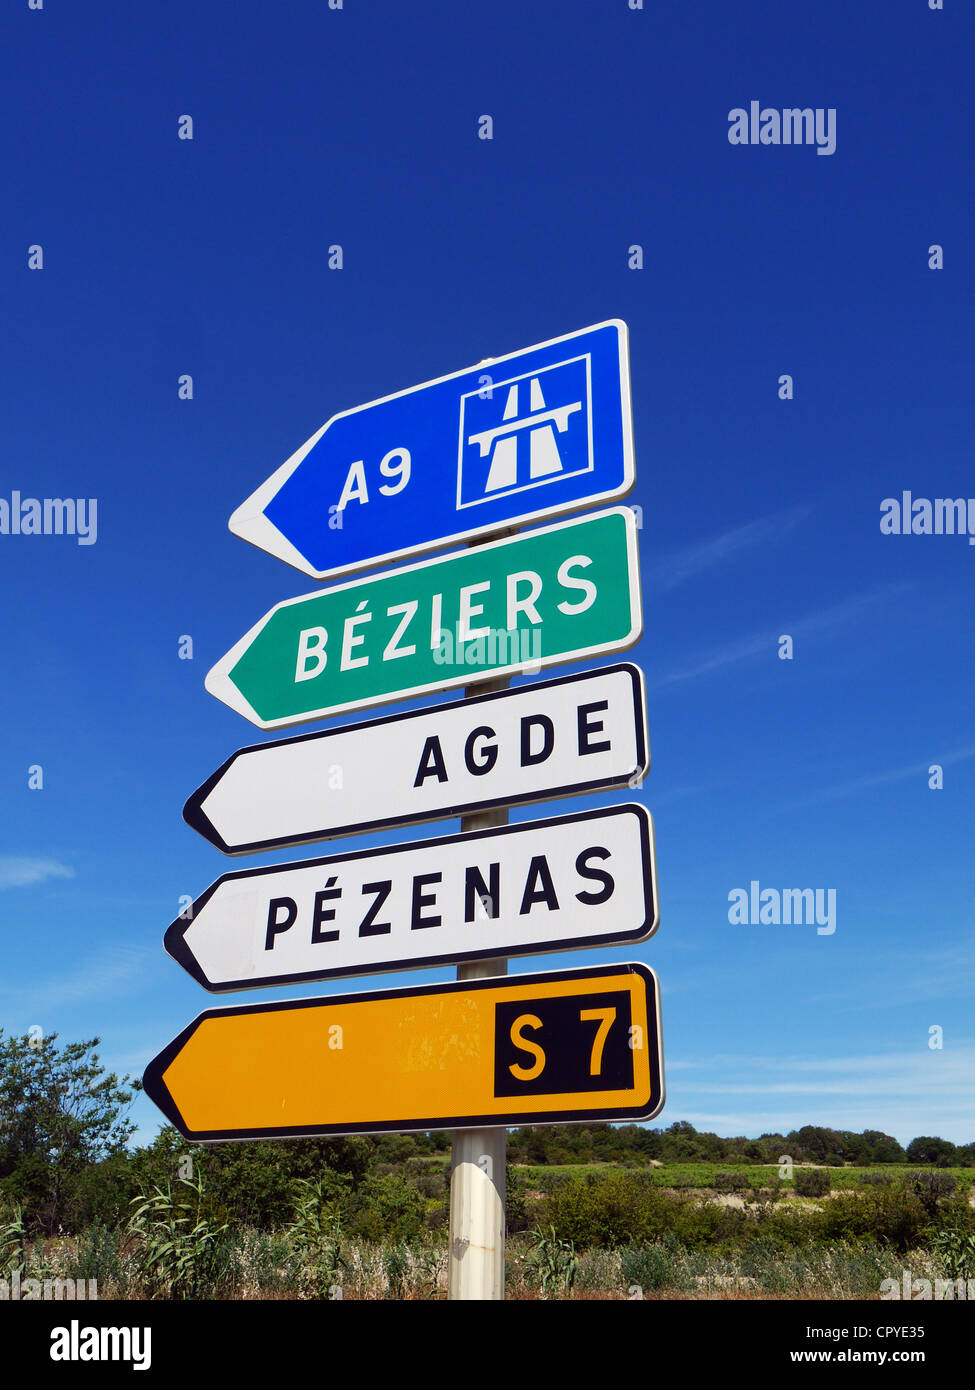 Road Signs In France High Resolution Stock Photography and Images 